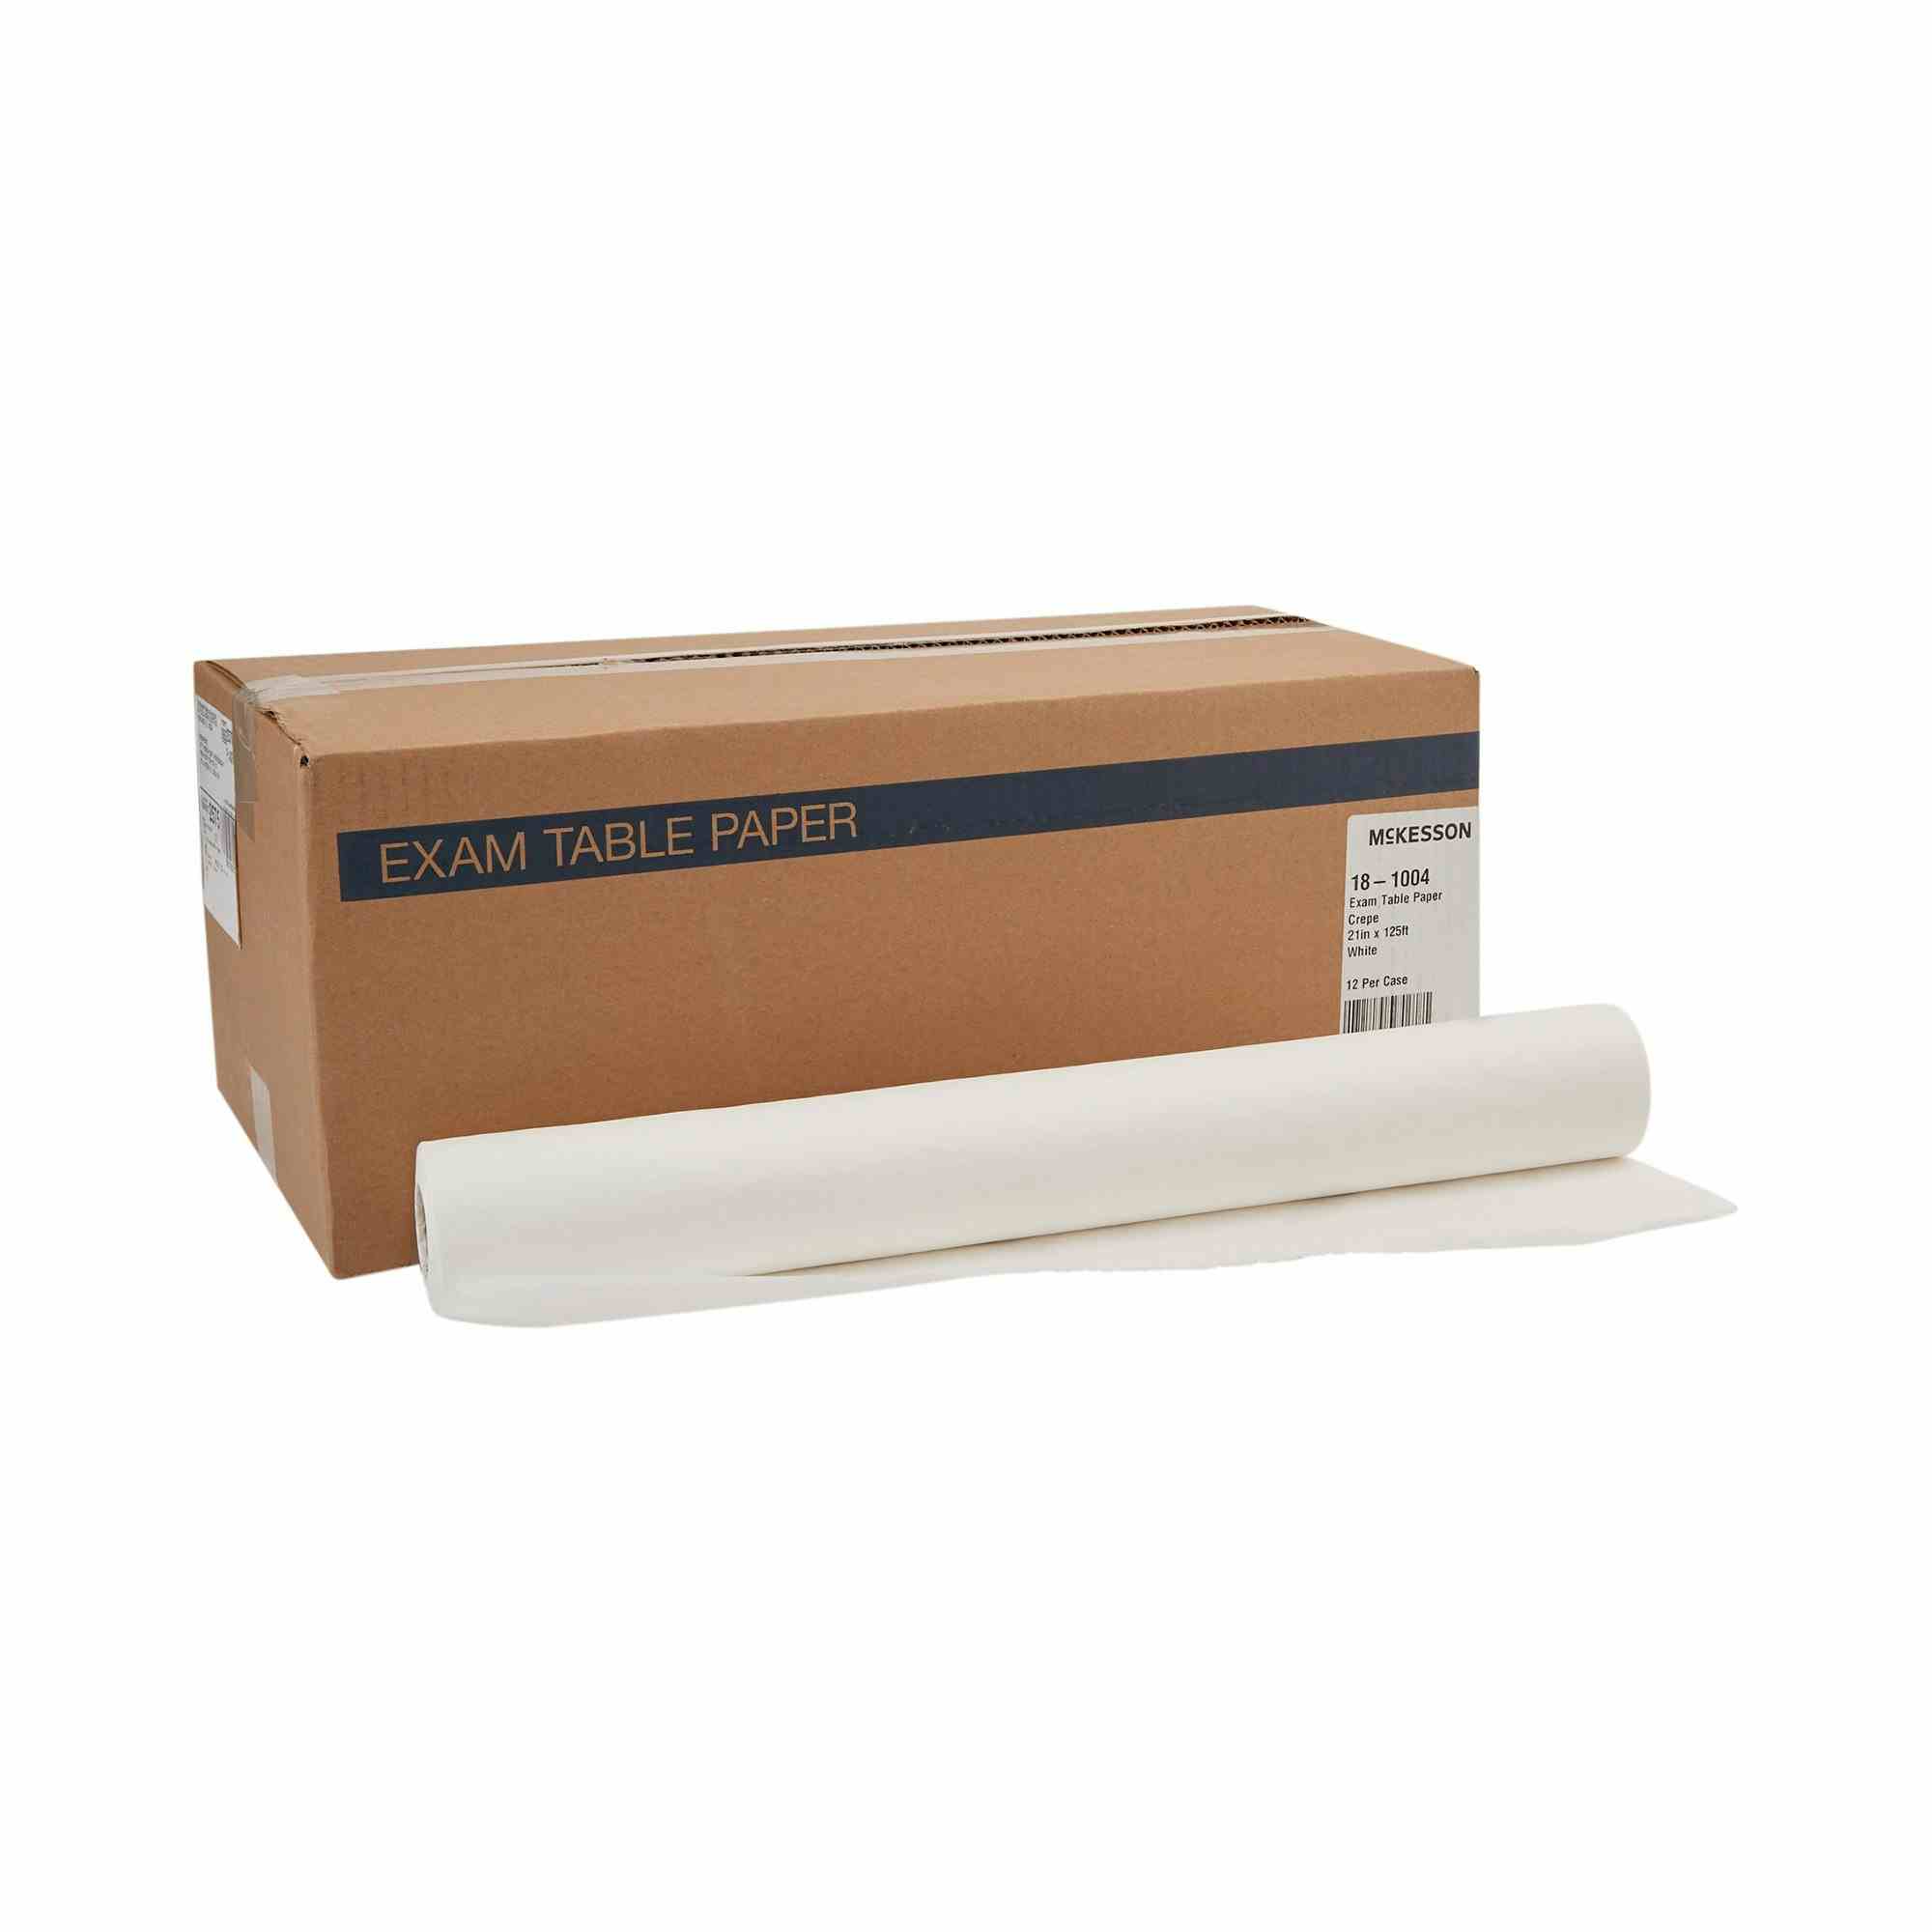 McKesson Crepe Table Paper, 21" X 125ft., 18-1004, Case of 12